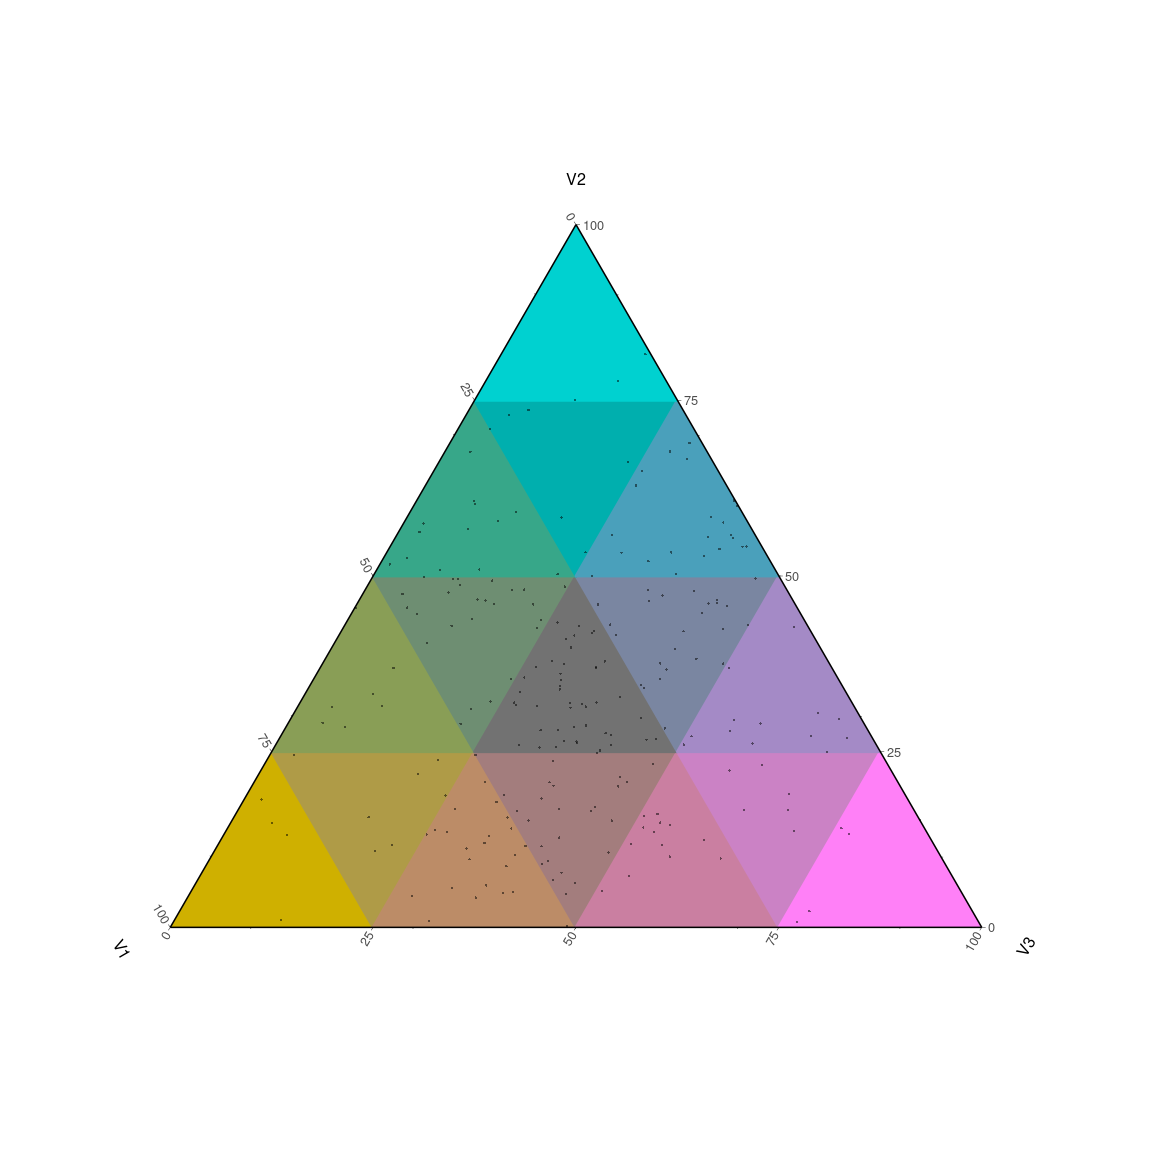 A ternary color key with the color-coded compositional data visible as points.